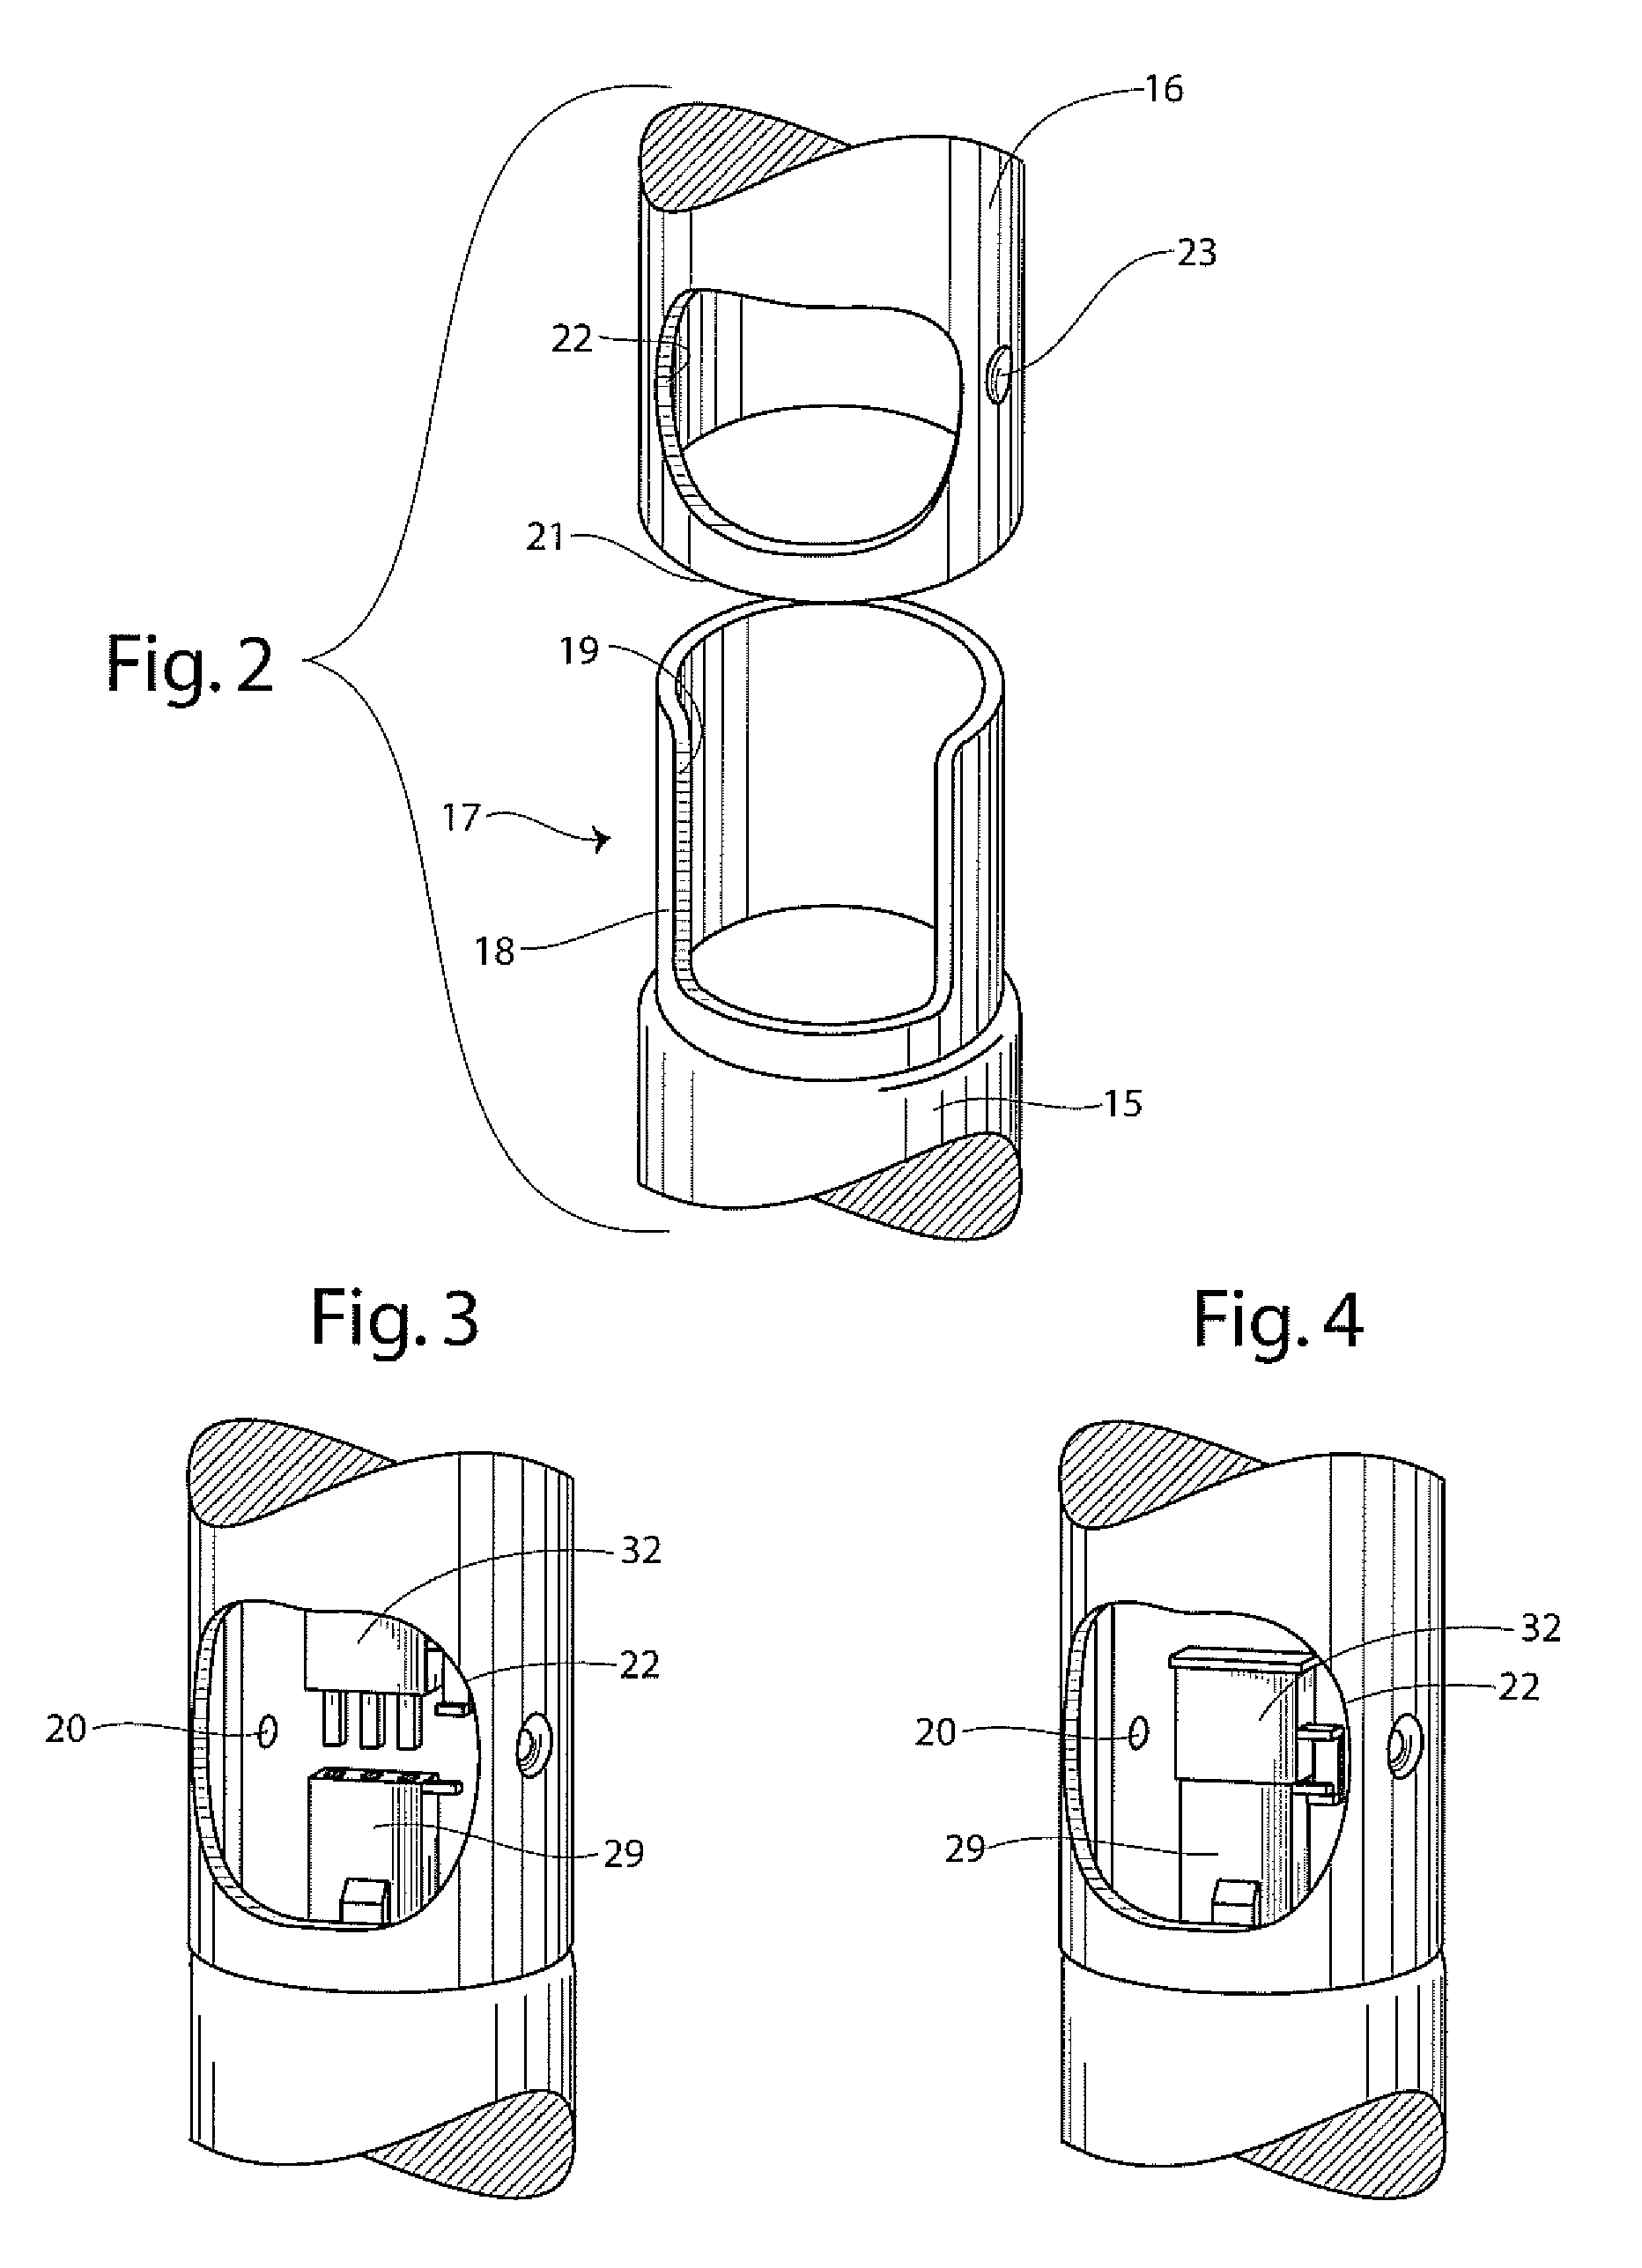 Electrical connector within tubular structure